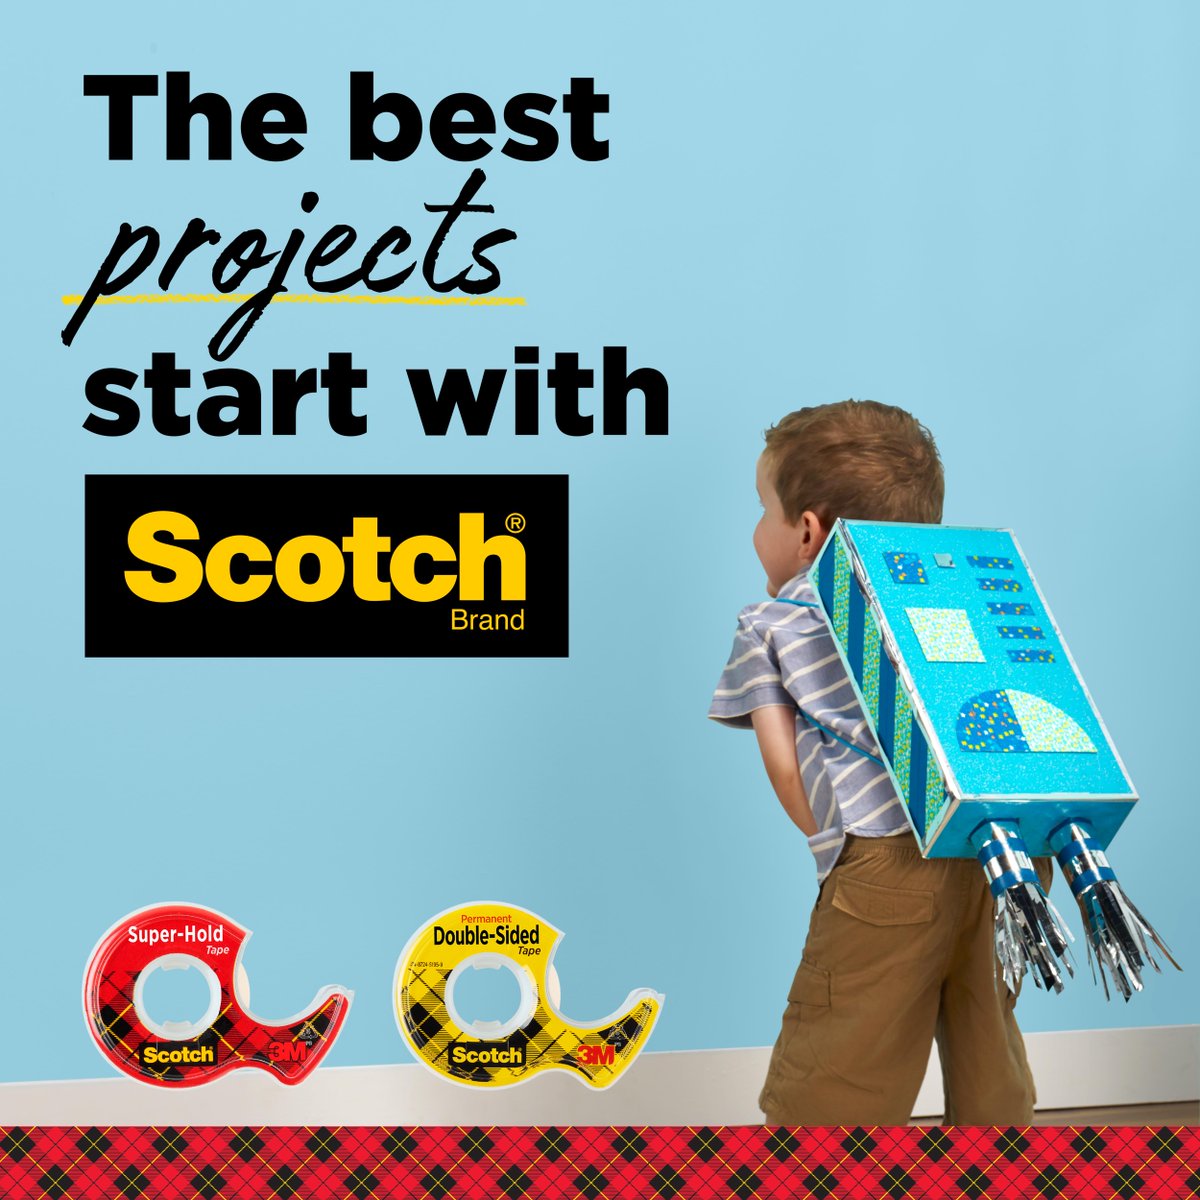 From paper to cardboard, Scotch® Super-Hold Tape helps your school projects soar to new heights with less mess. #ScotchBrand #BacktoSchool #papercrafts